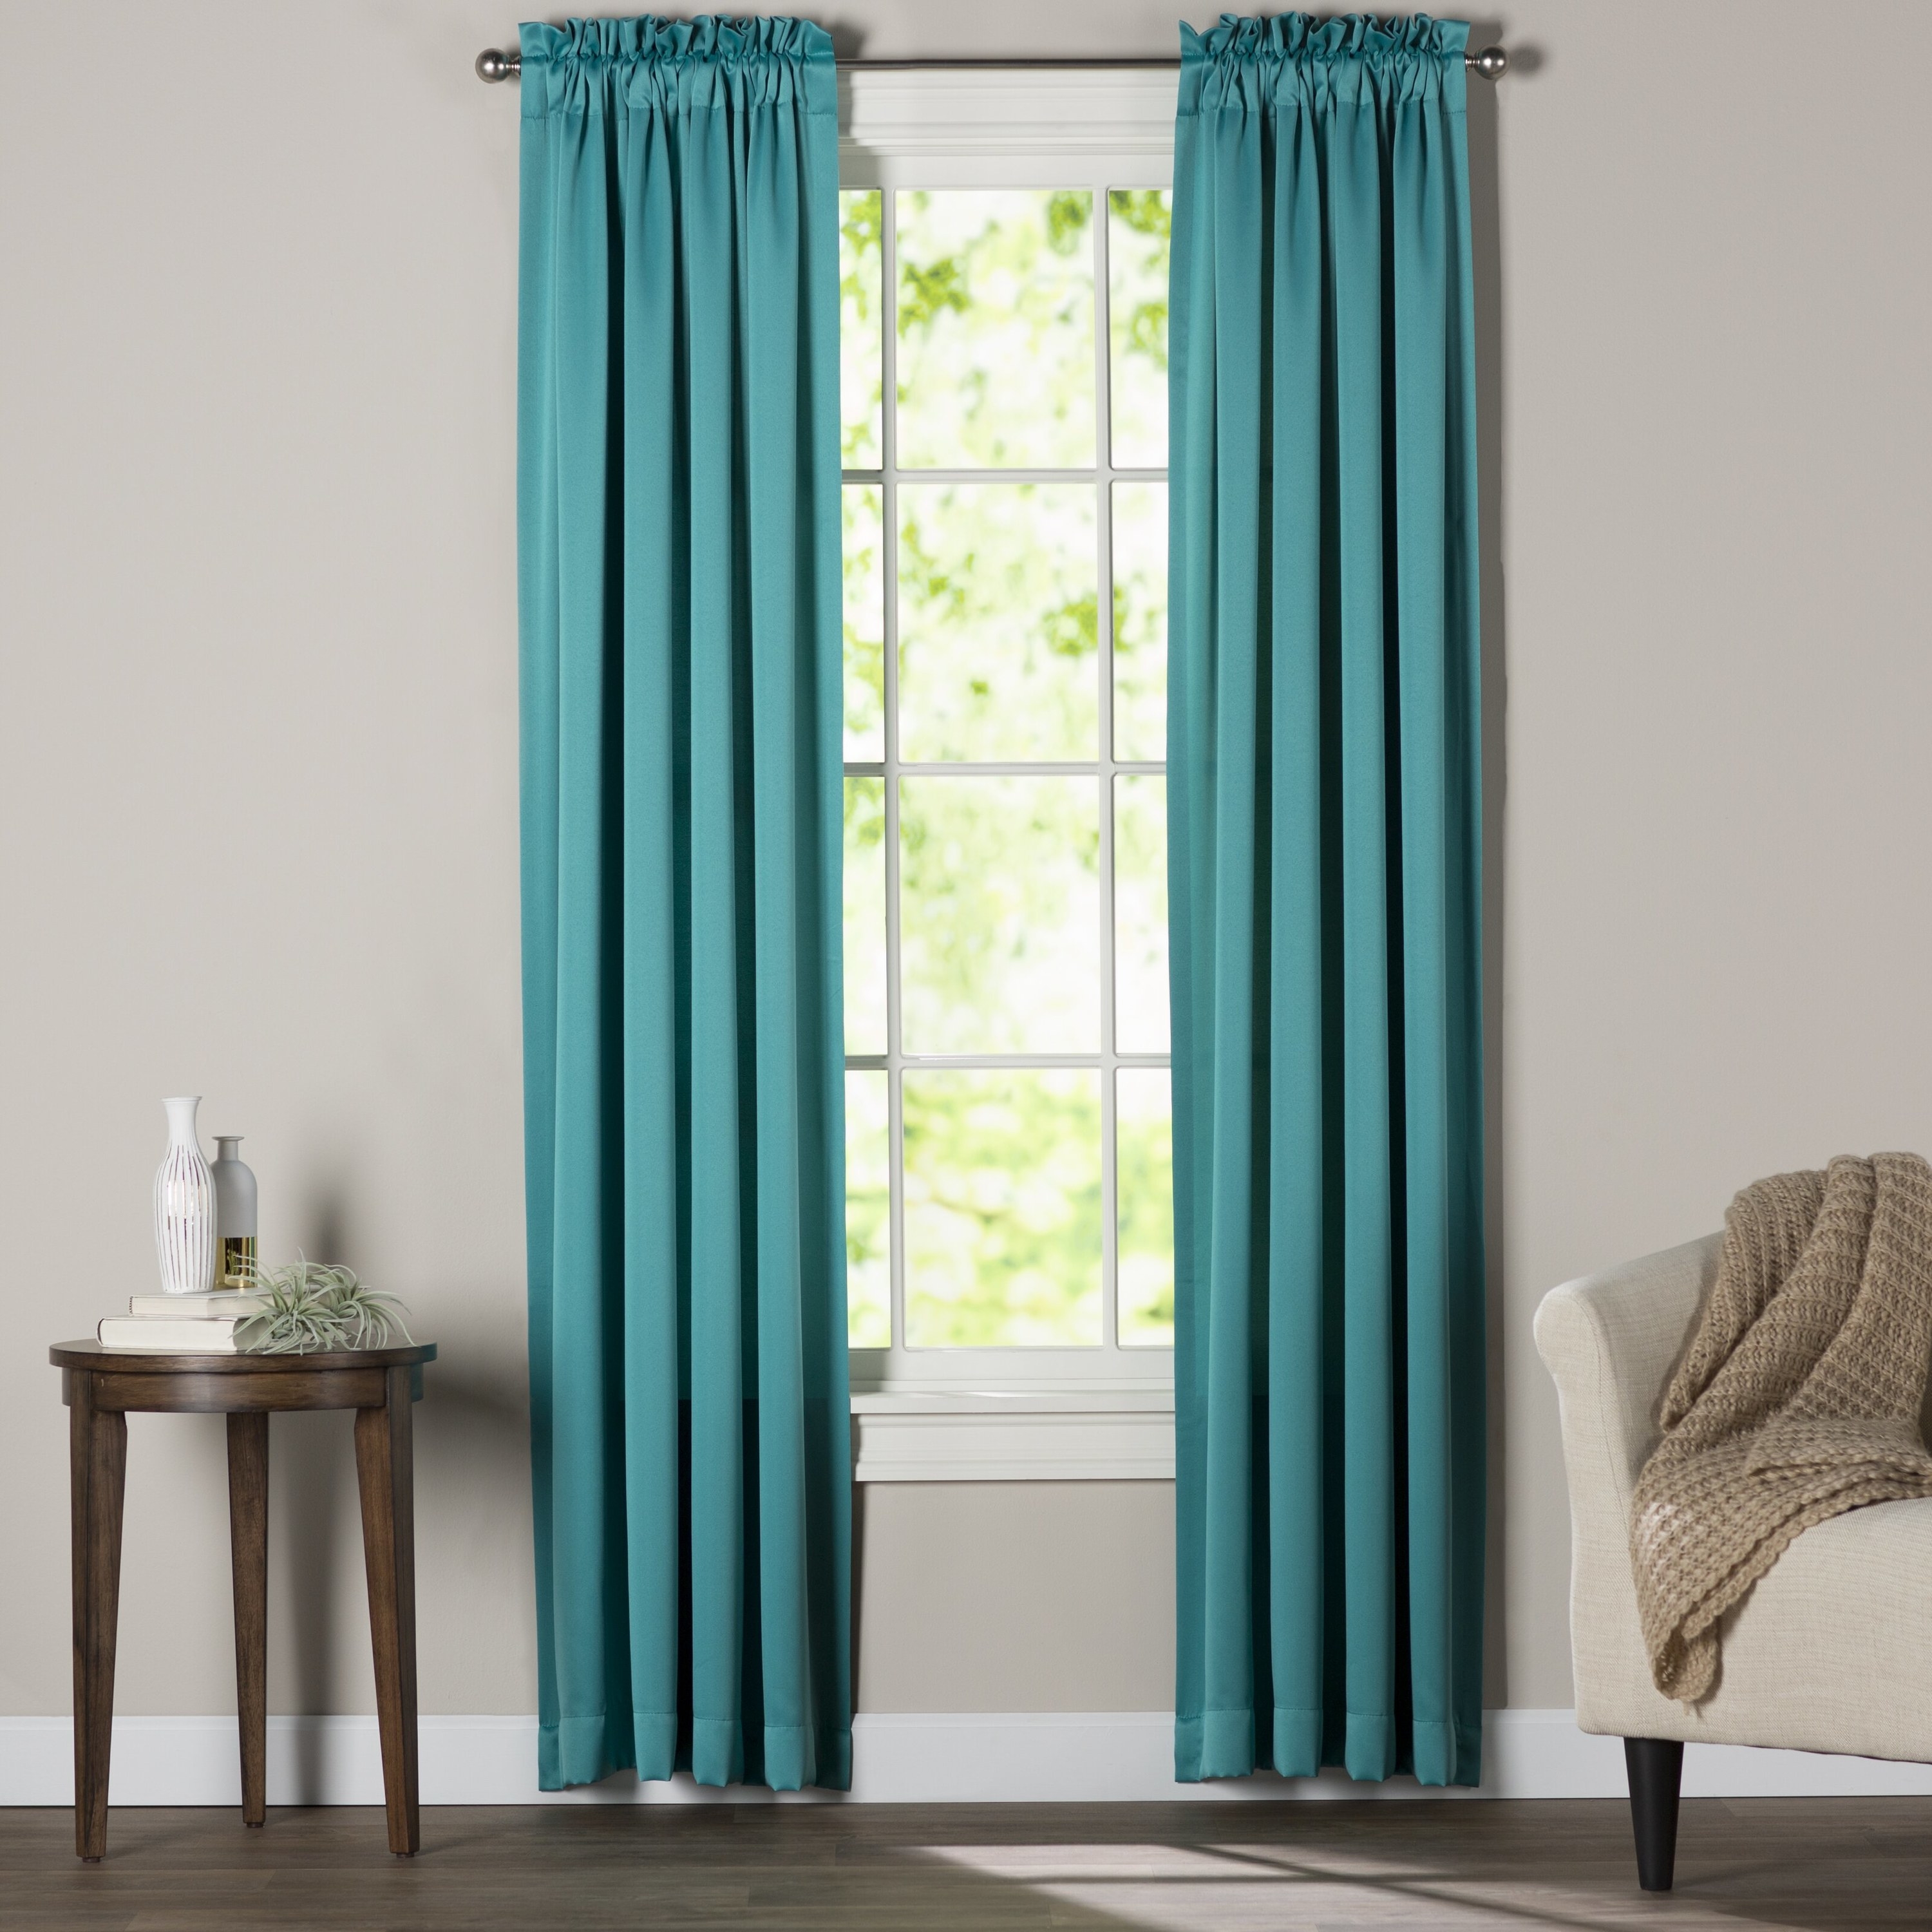 teal curtains on a window next to an armchair, rug and nightstand